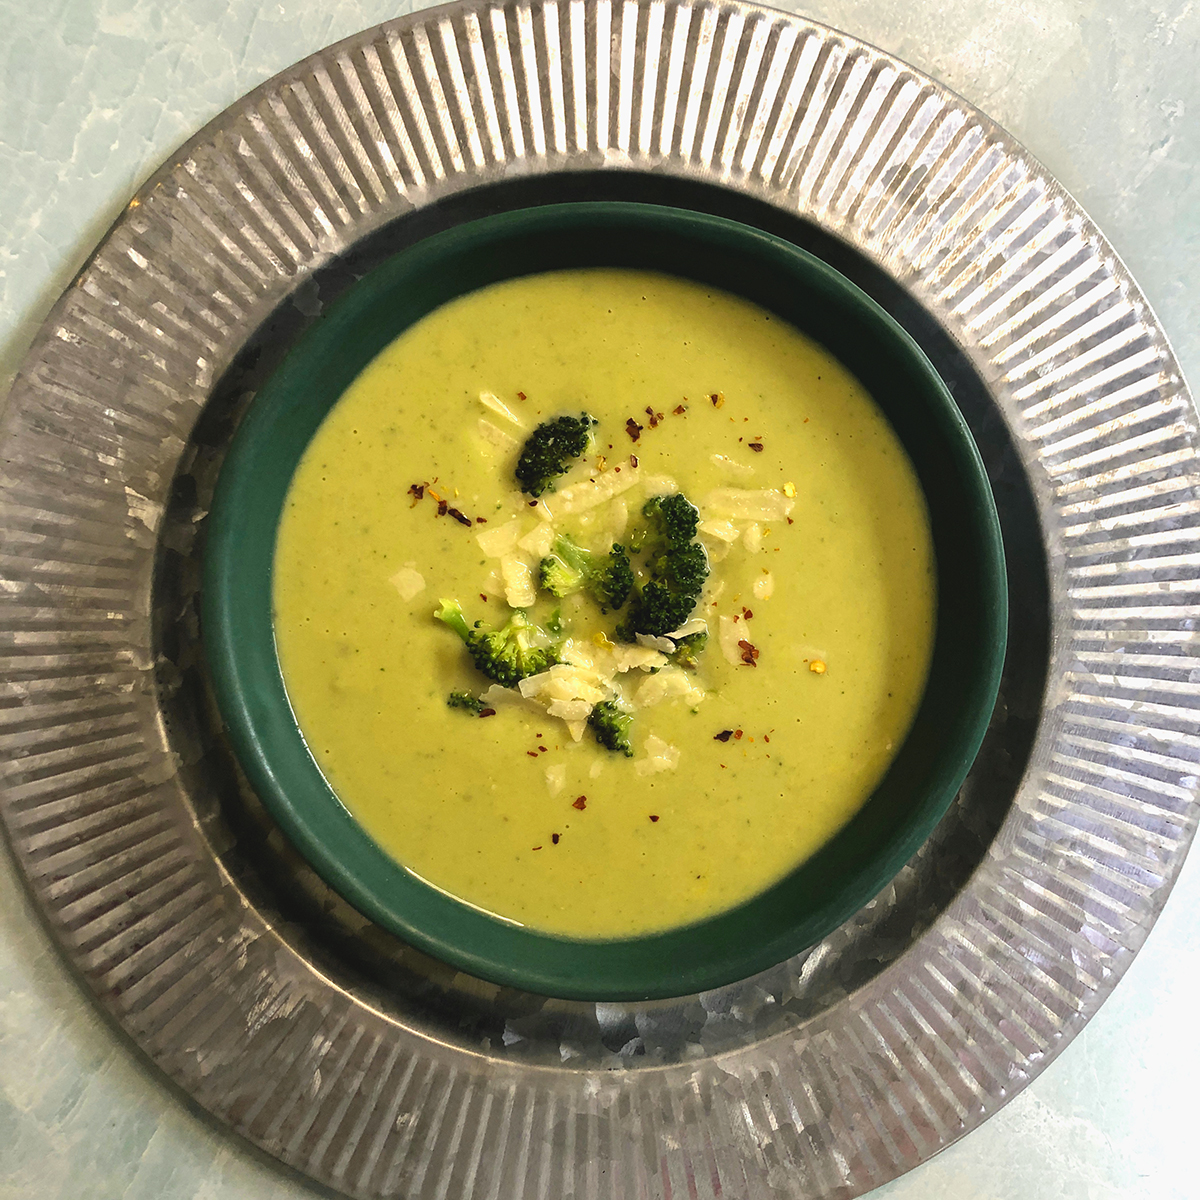 Broccoli Soup with Cheddar and Parmesan